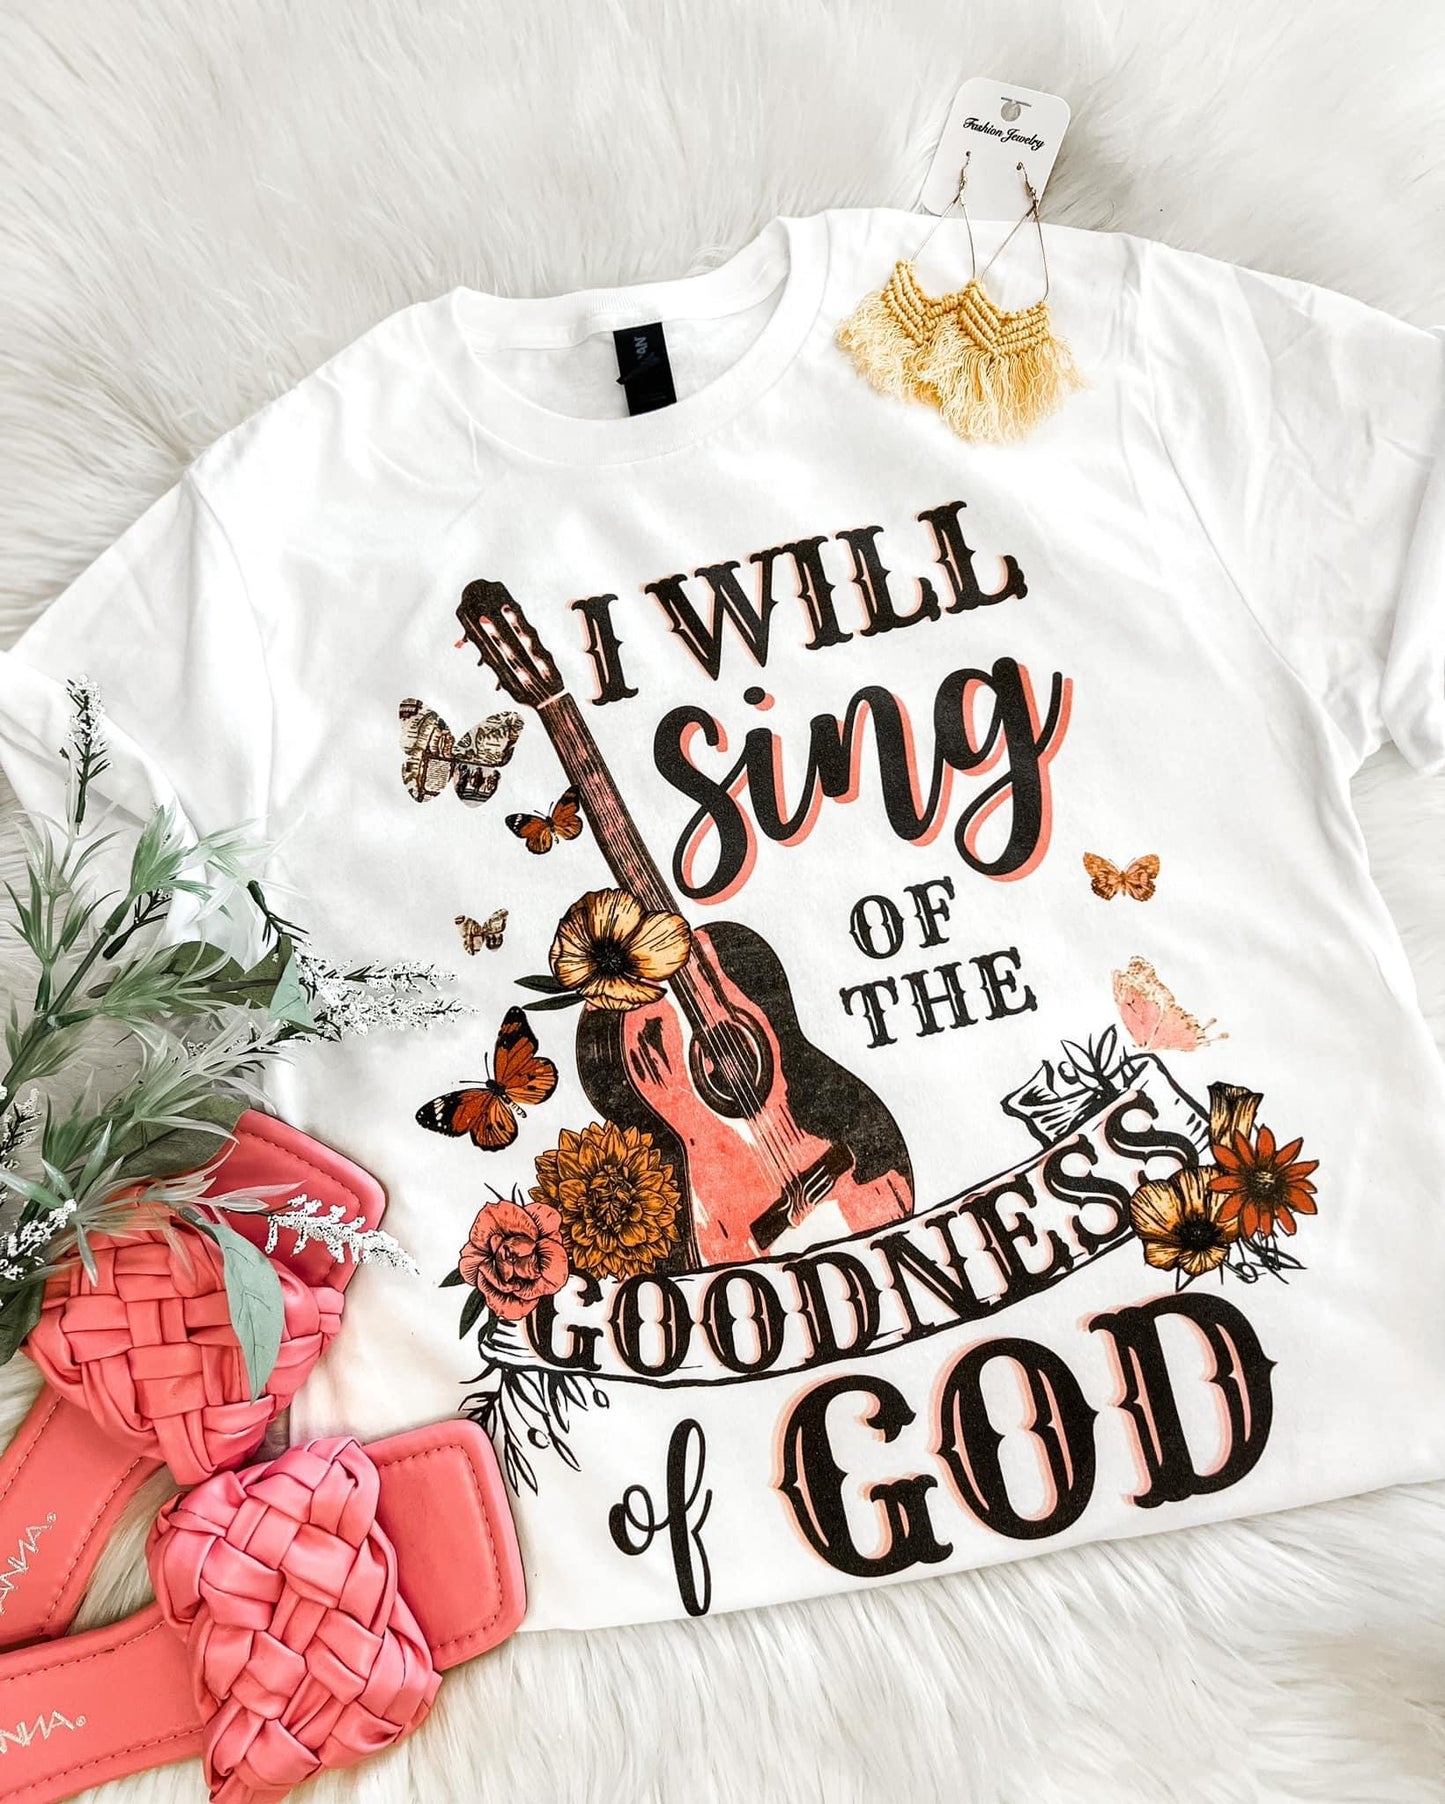 I will sing the goodness of God tee - white